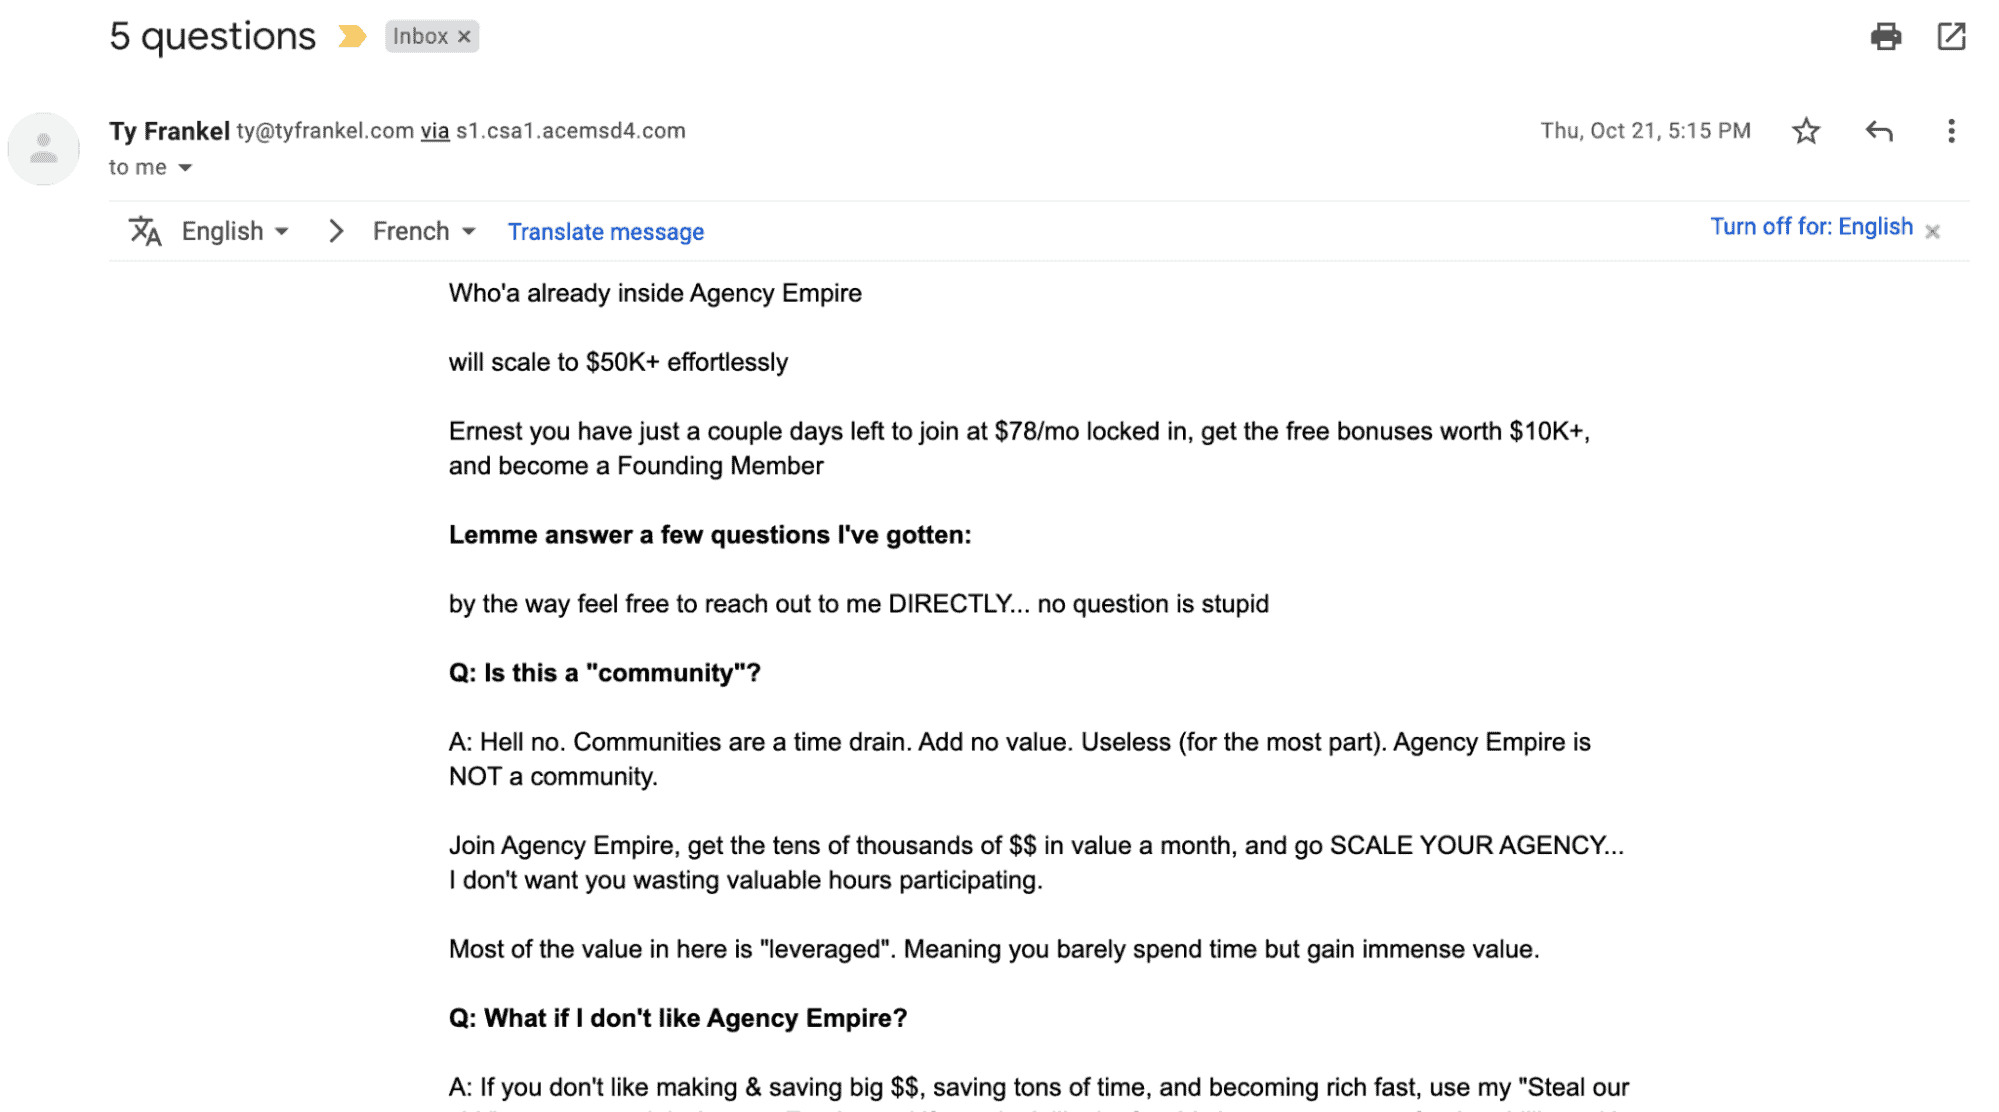 Q&A email example